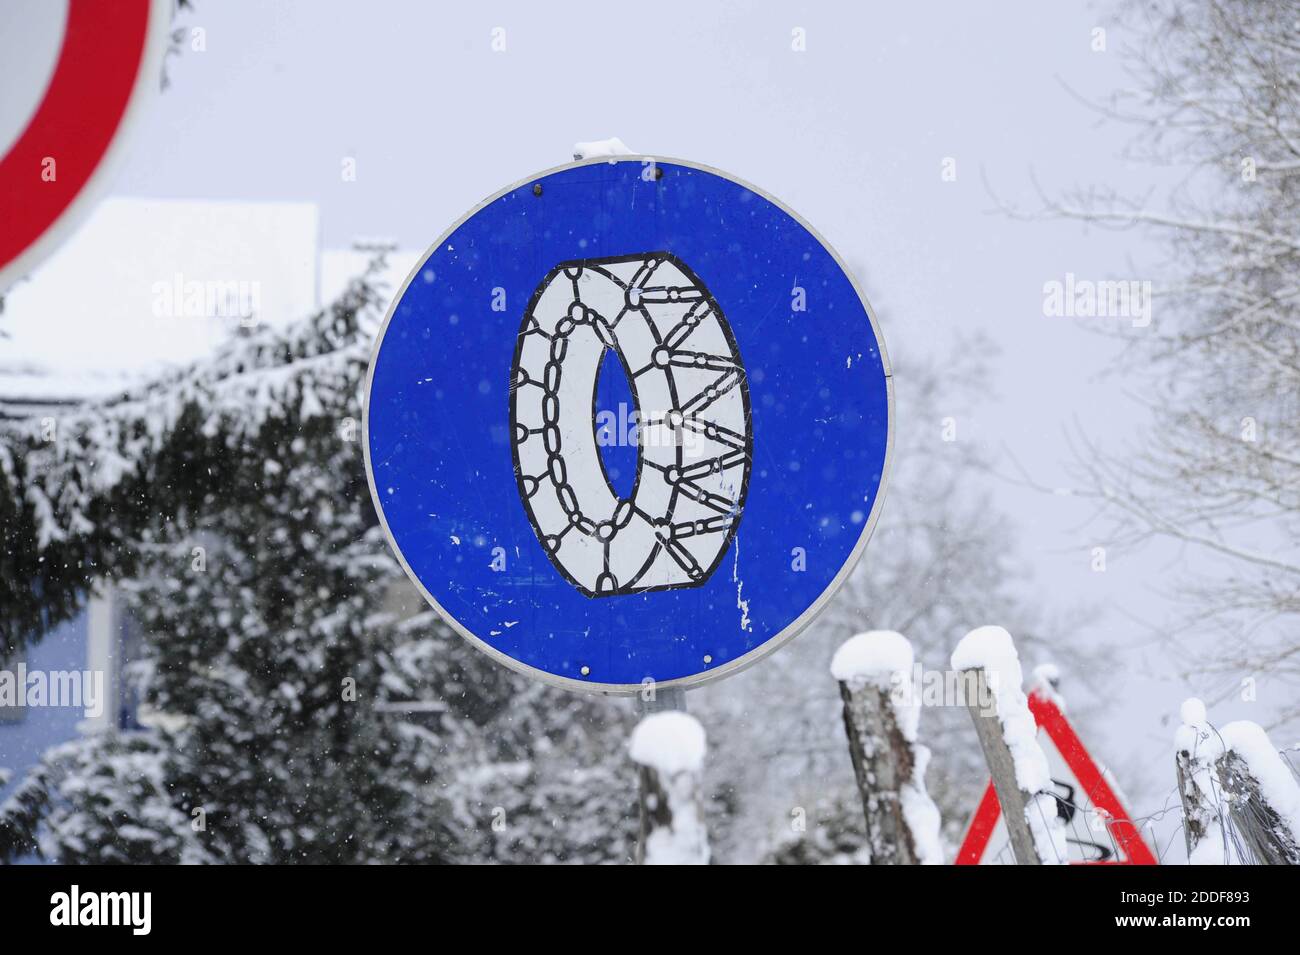 snow chain obligation traffic sign, on a snowy winter road Stock Photo